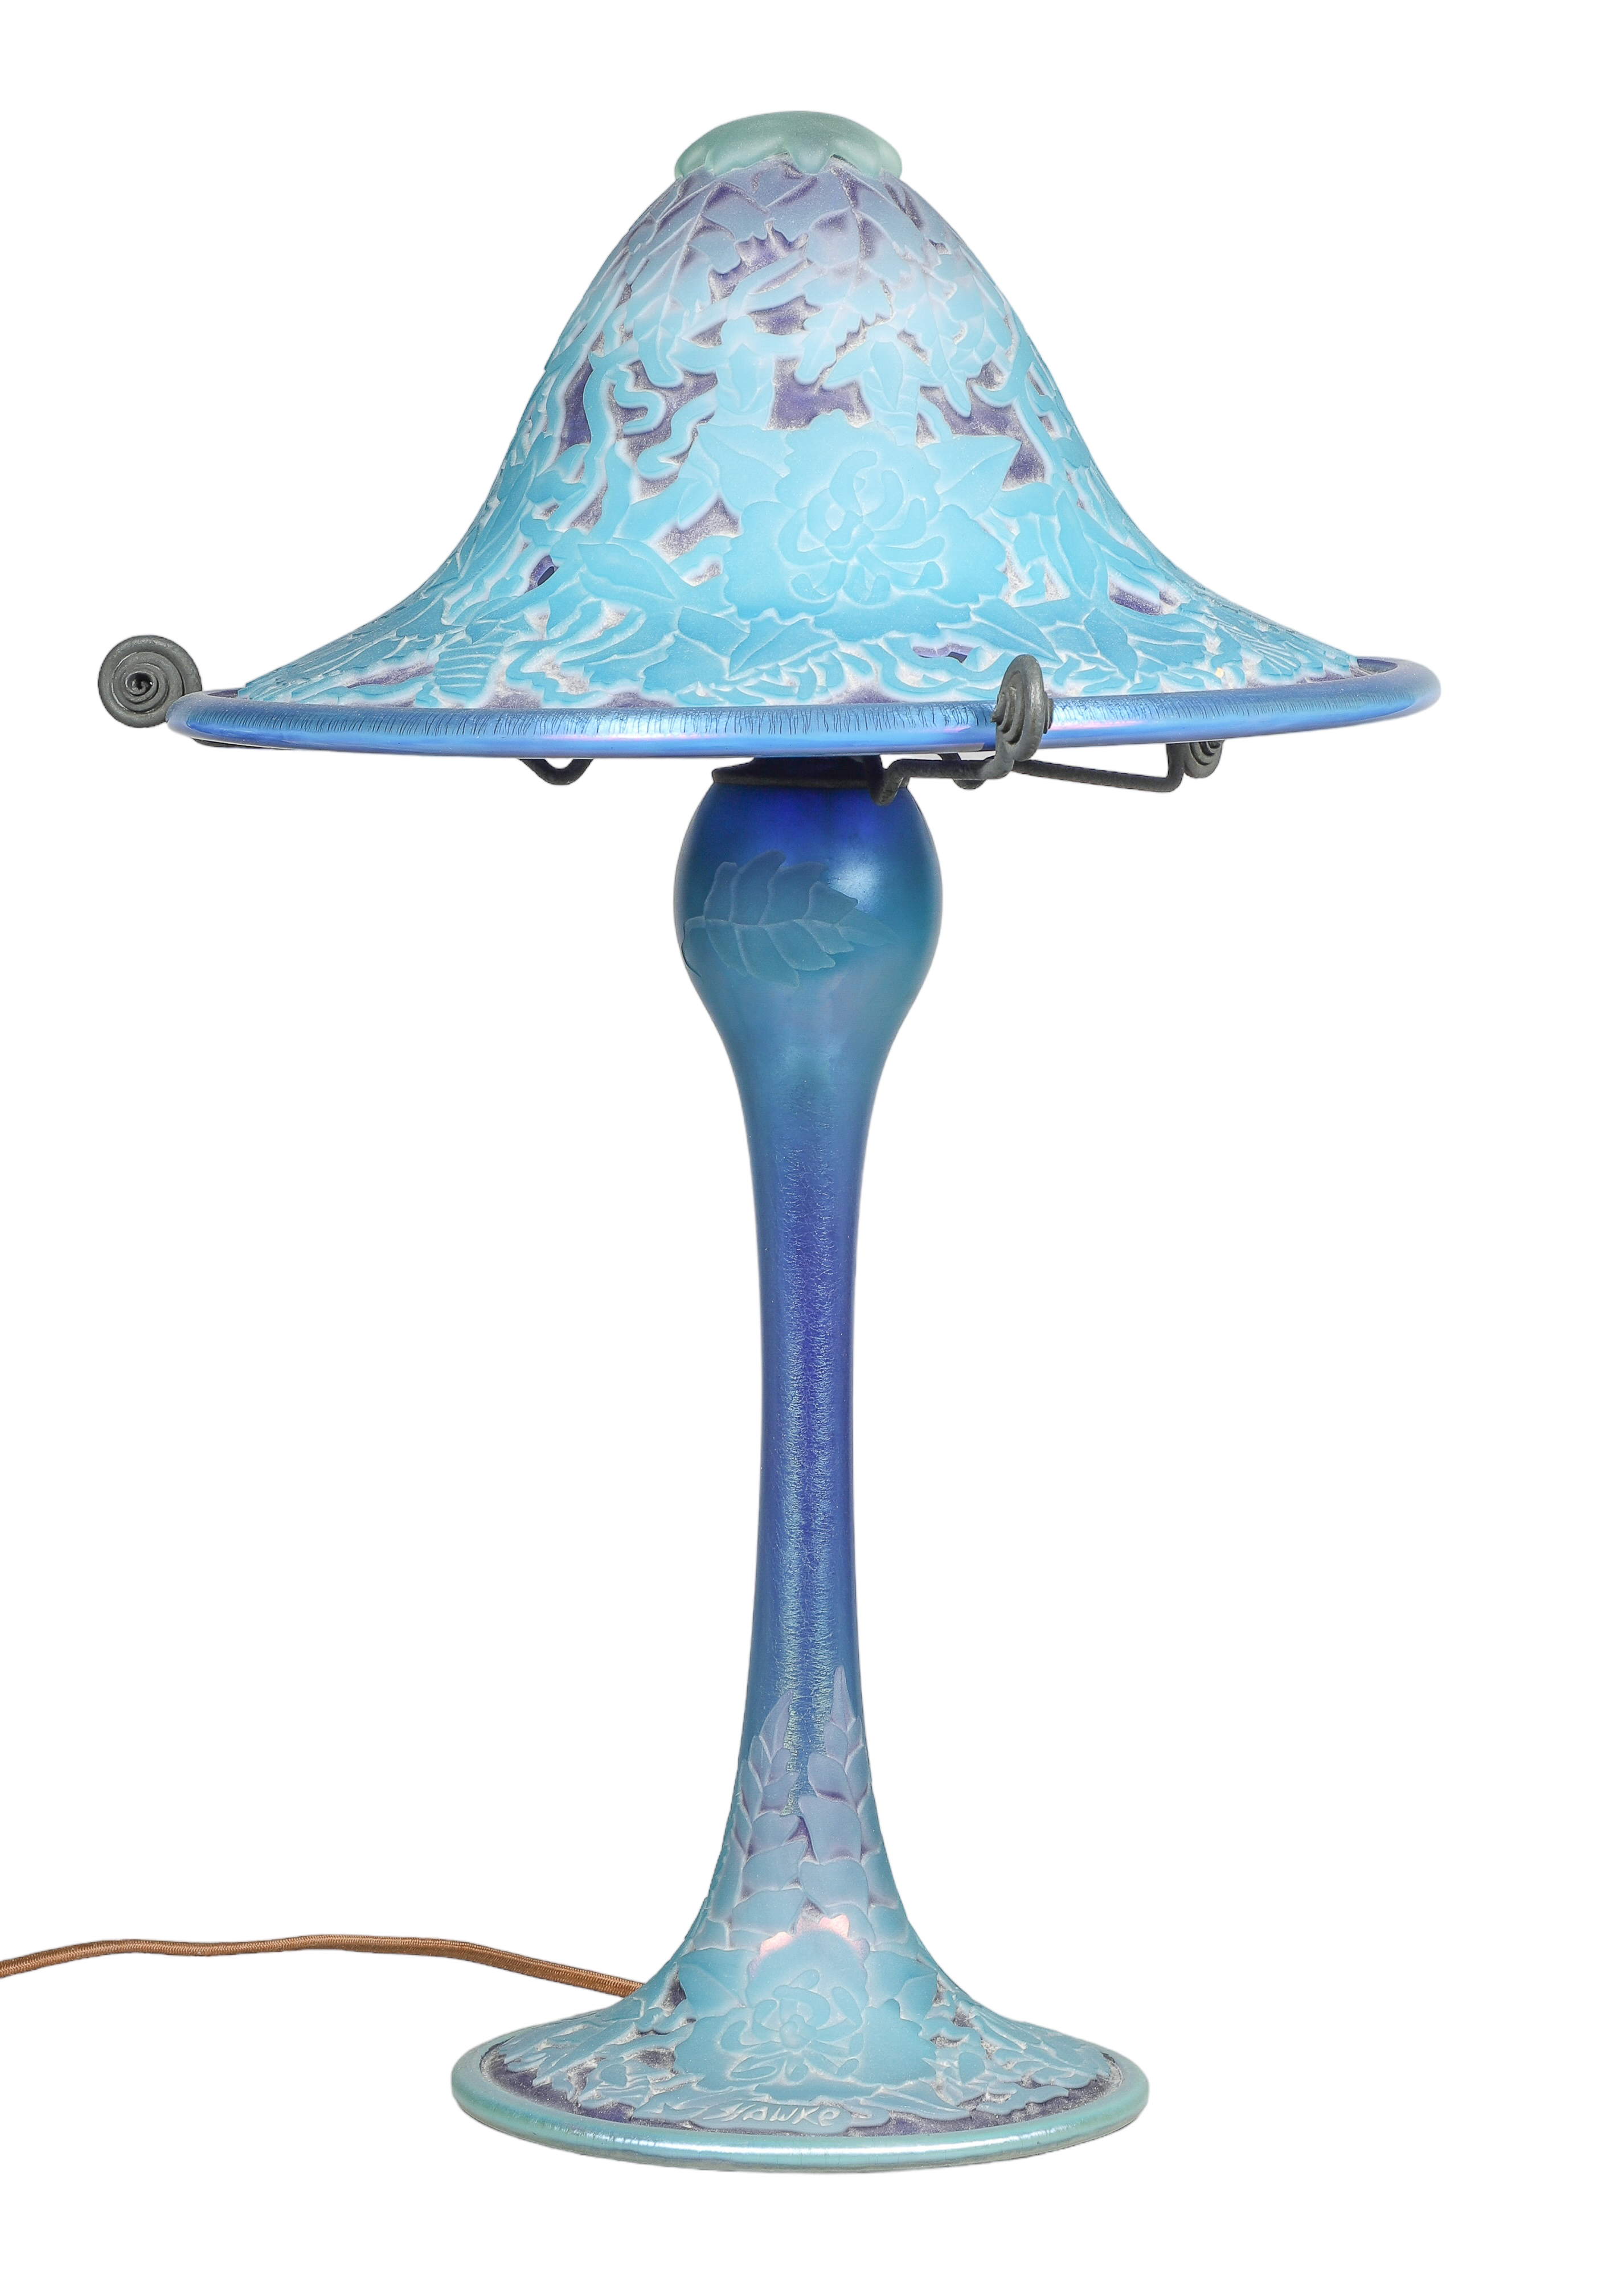 Iridescent cameo glass table lamp,